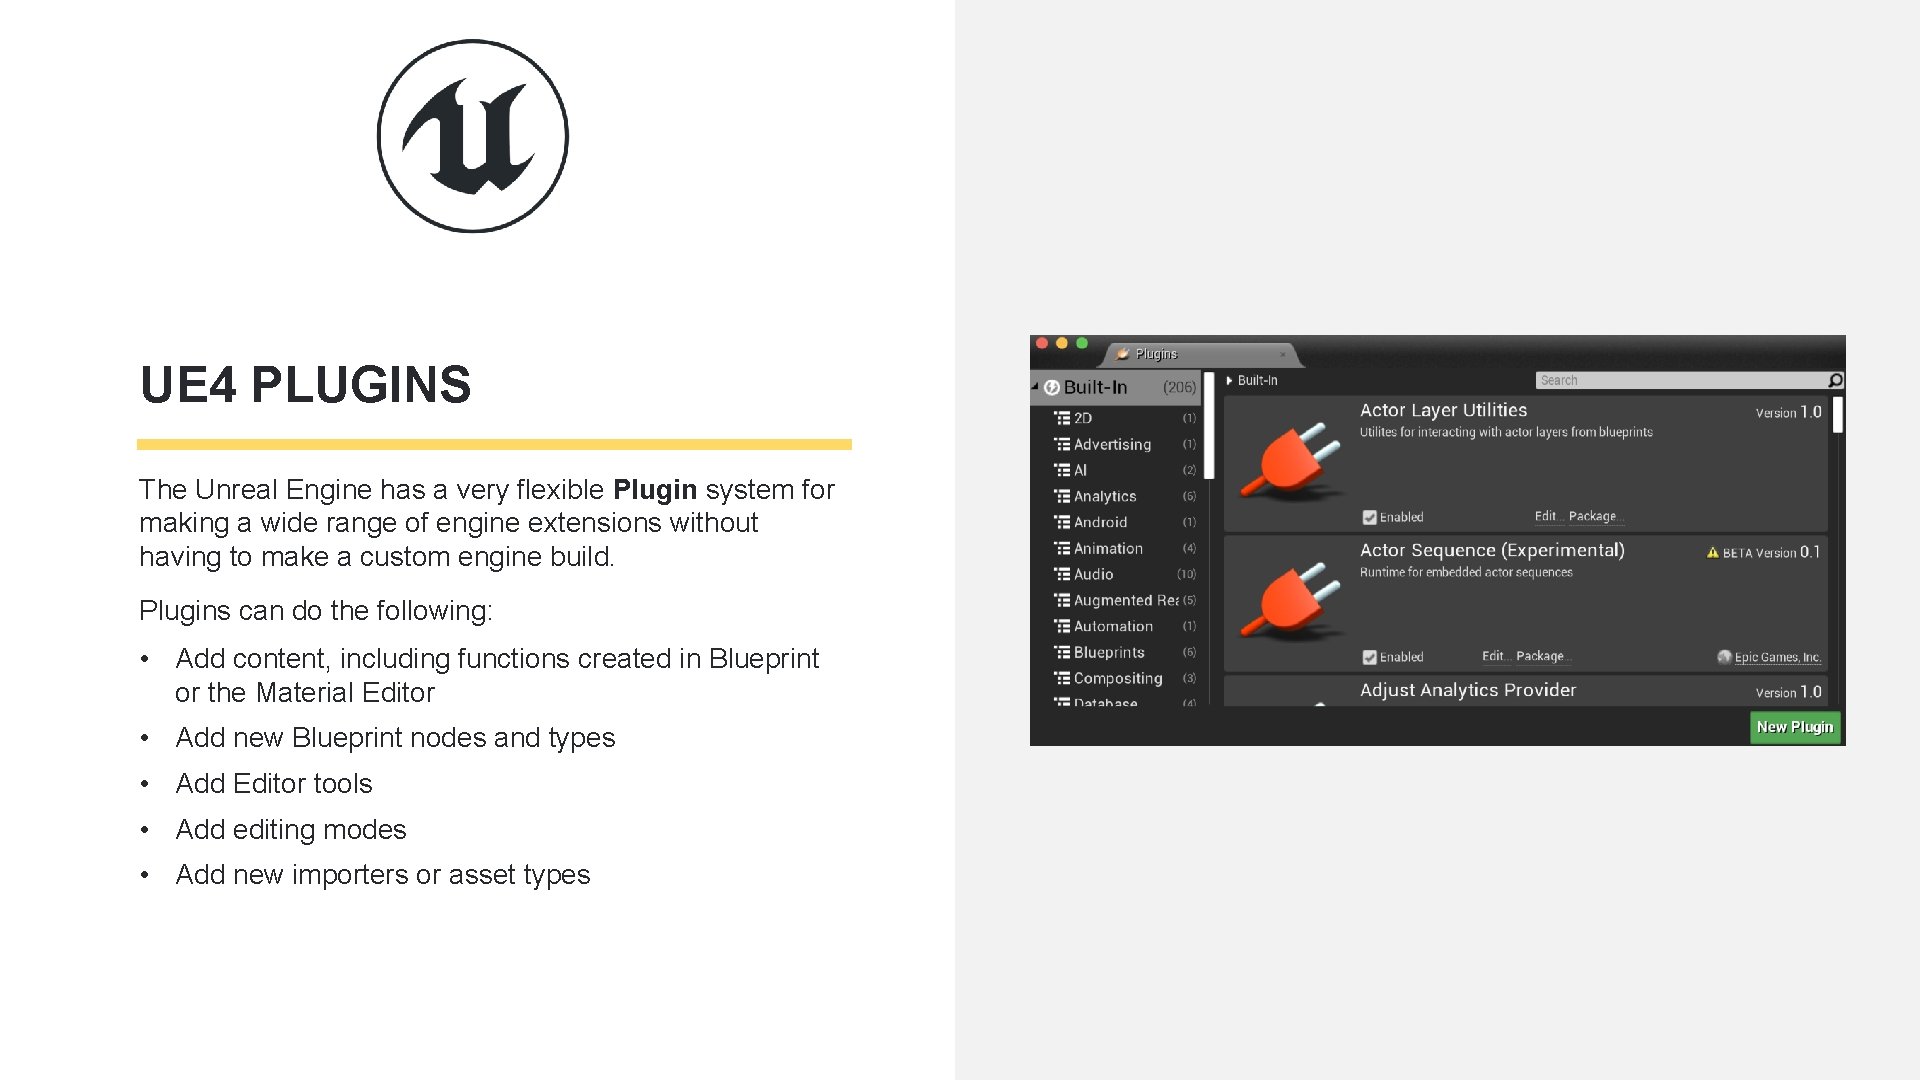 UE 4 PLUGINS The Unreal Engine has a very flexible Plugin system for making